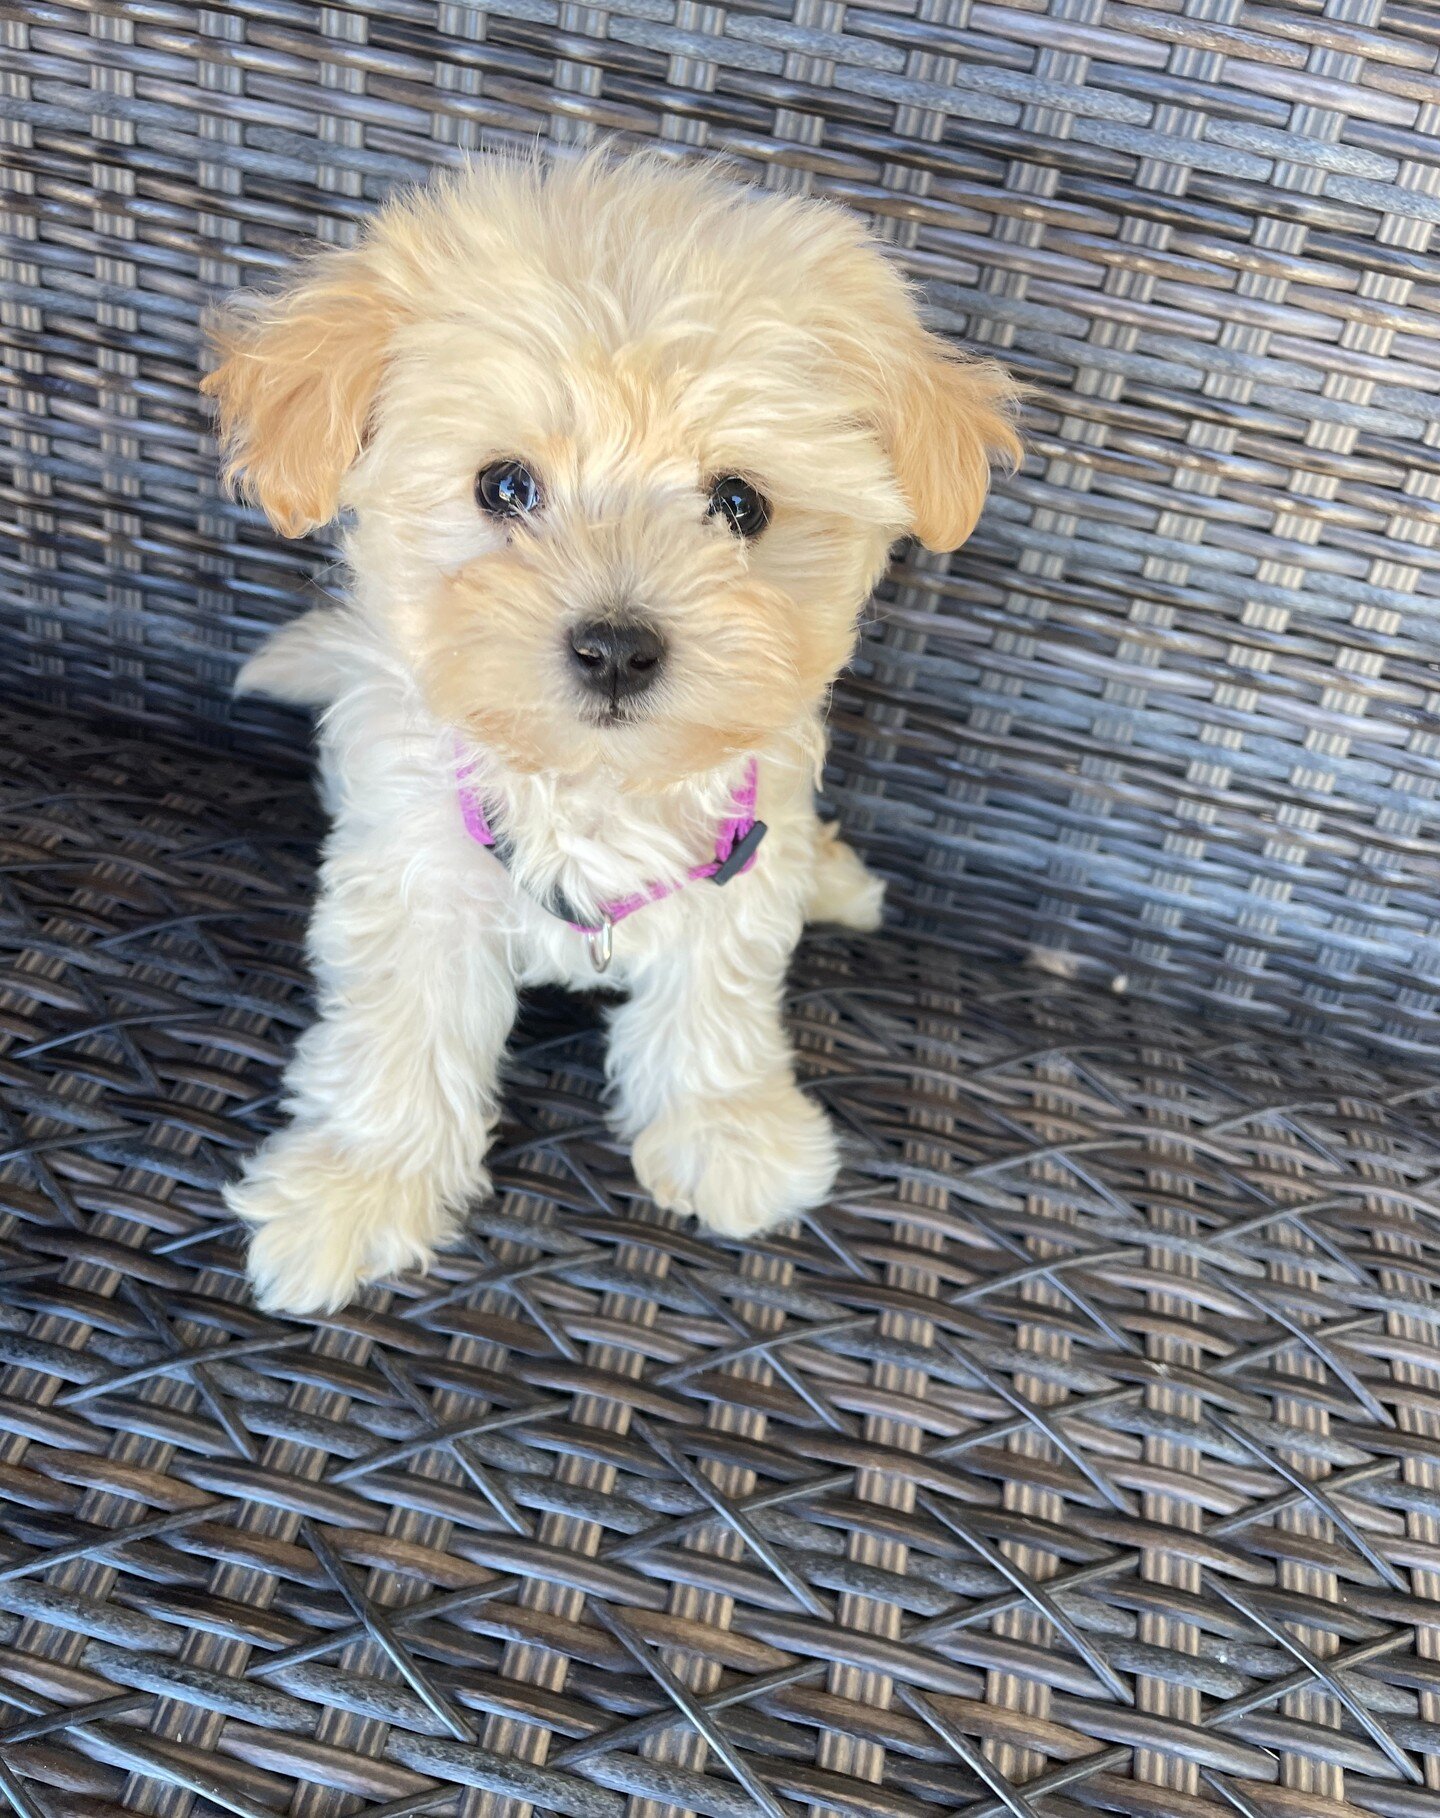 Warning: Cuteness overload to the max! 🥹😍

#Milly #maltipoo #puppy #apricot #adorable #toocute #cute #cutenessoverload #fluffy #female #Lilaslitter #Lila #puppiesofinstagram #doodlesofinstagram #maltipoosofinstagram